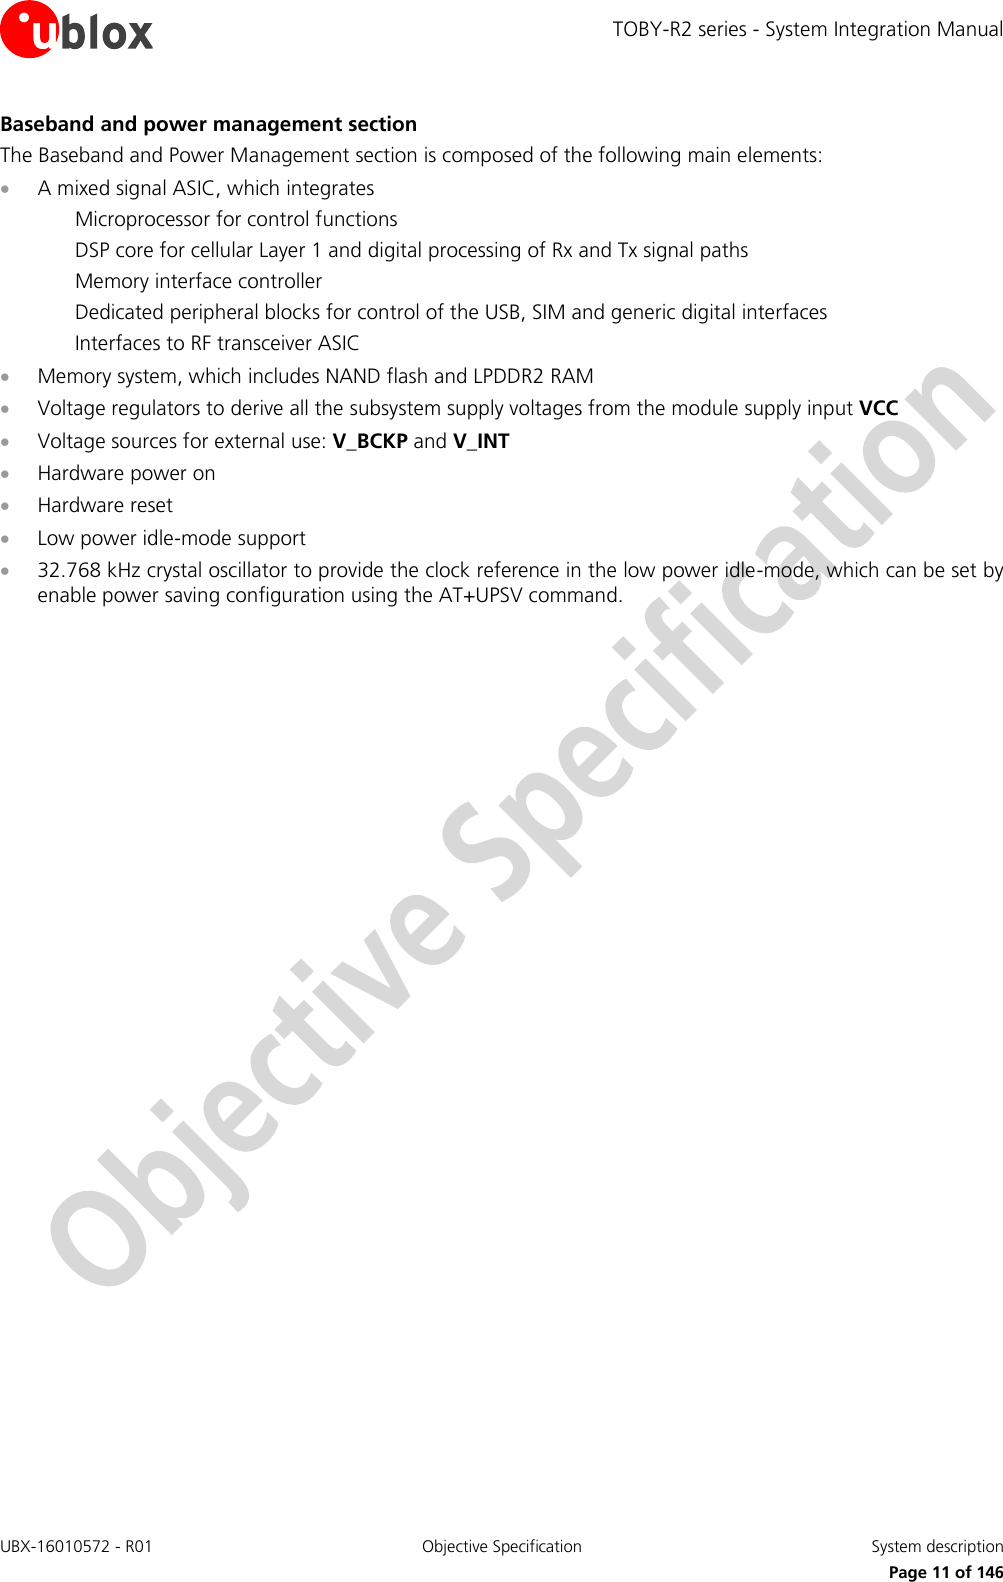 TOBY-R2 series - System Integration Manual UBX-16010572 - R01  Objective Specification  System description     Page 11 of 146 Baseband and power management section The Baseband and Power Management section is composed of the following main elements:  A mixed signal ASIC, which integrates Microprocessor for control functions DSP core for cellular Layer 1 and digital processing of Rx and Tx signal paths Memory interface controller Dedicated peripheral blocks for control of the USB, SIM and generic digital interfaces Interfaces to RF transceiver ASIC  Memory system, which includes NAND flash and LPDDR2 RAM  Voltage regulators to derive all the subsystem supply voltages from the module supply input VCC  Voltage sources for external use: V_BCKP and V_INT   Hardware power on   Hardware reset  Low power idle-mode support  32.768 kHz crystal oscillator to provide the clock reference in the low power idle-mode, which can be set by enable power saving configuration using the AT+UPSV command.  